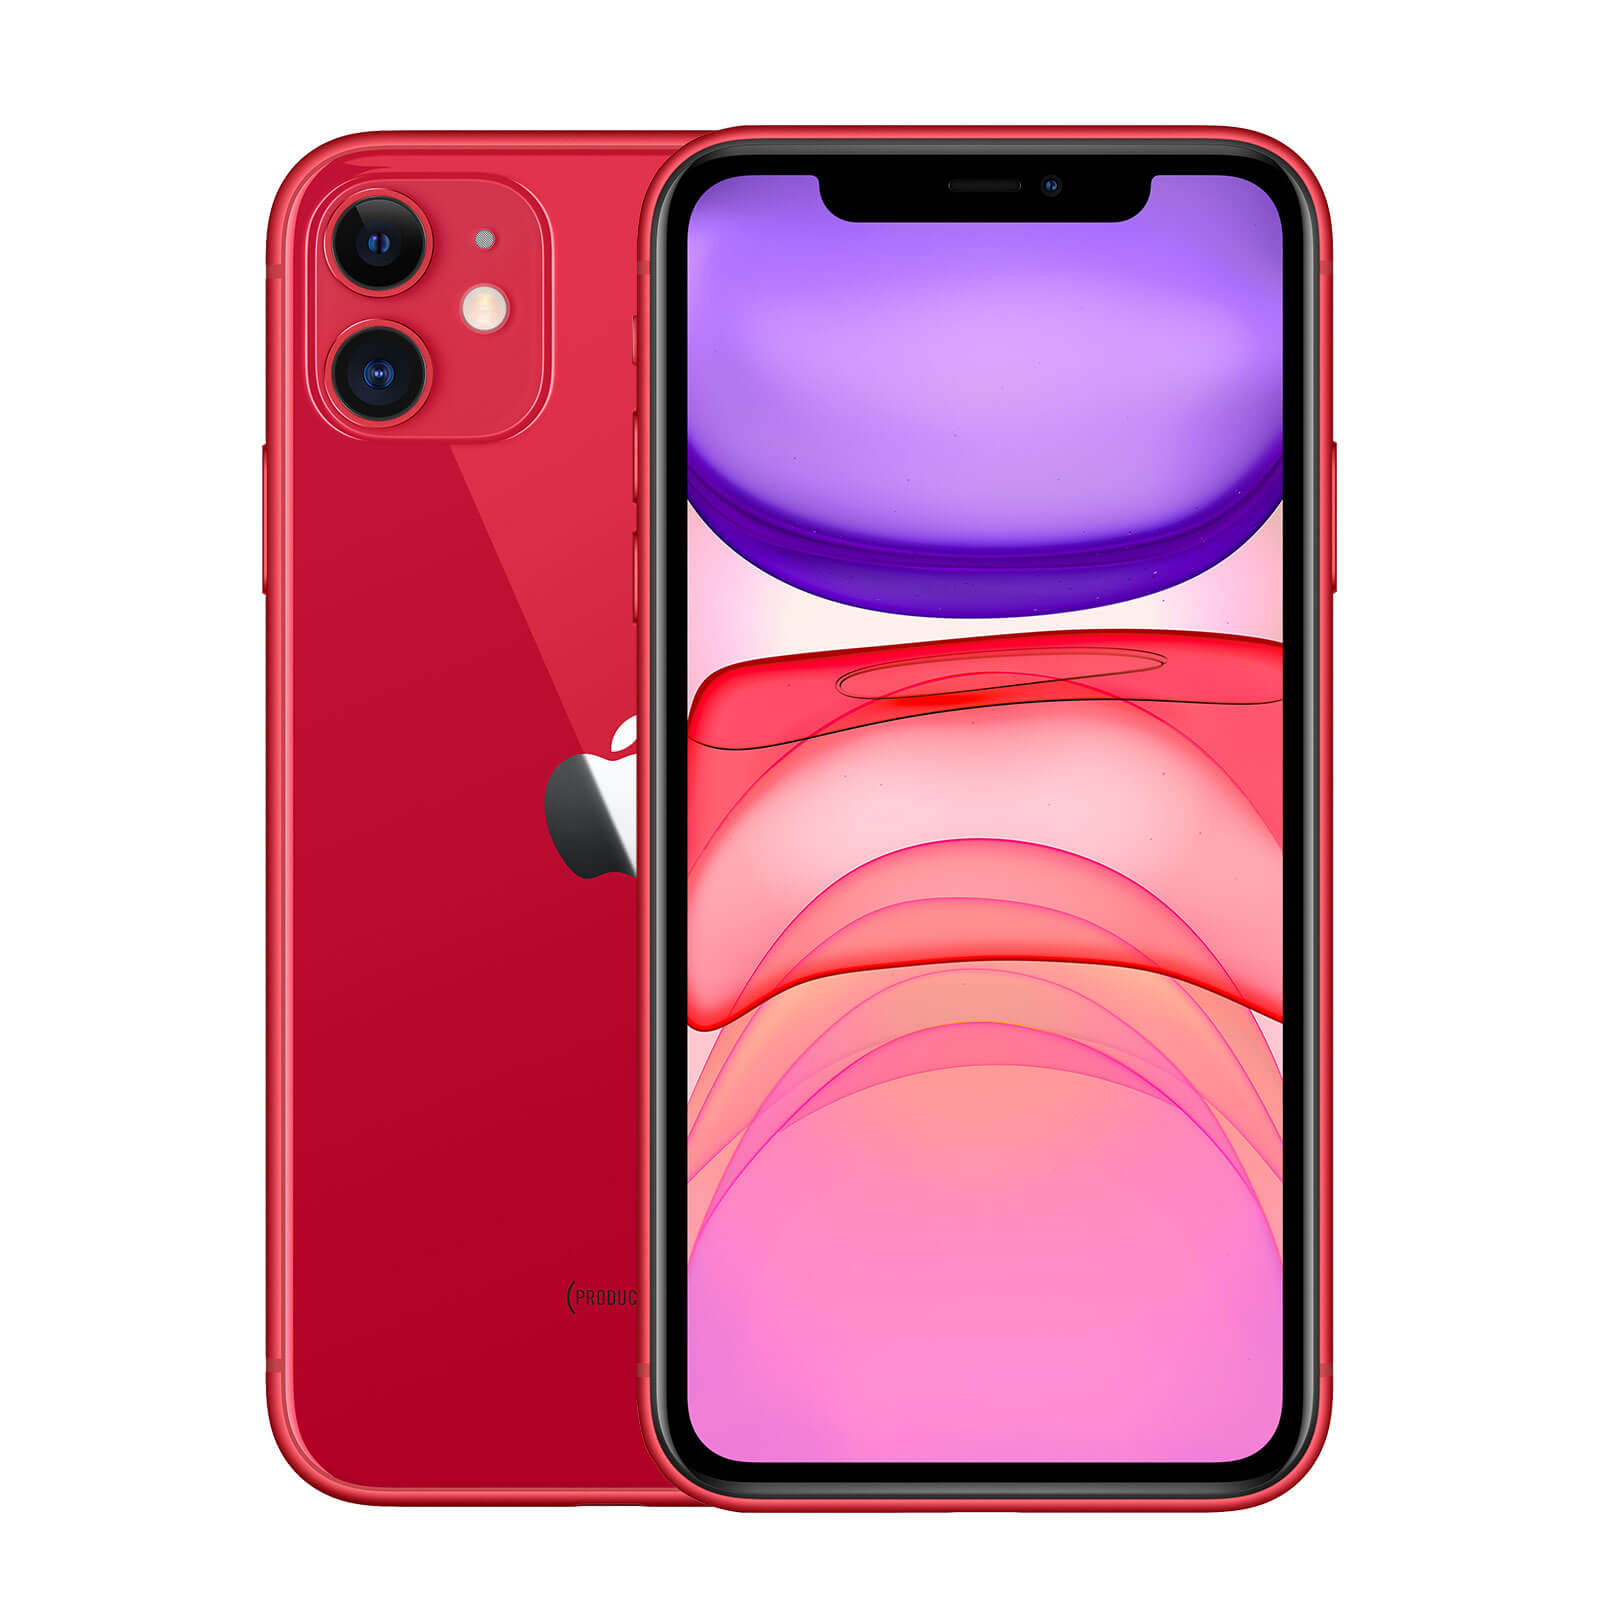 Apple iPhone 11 64GB Product Red Fair - Sprint